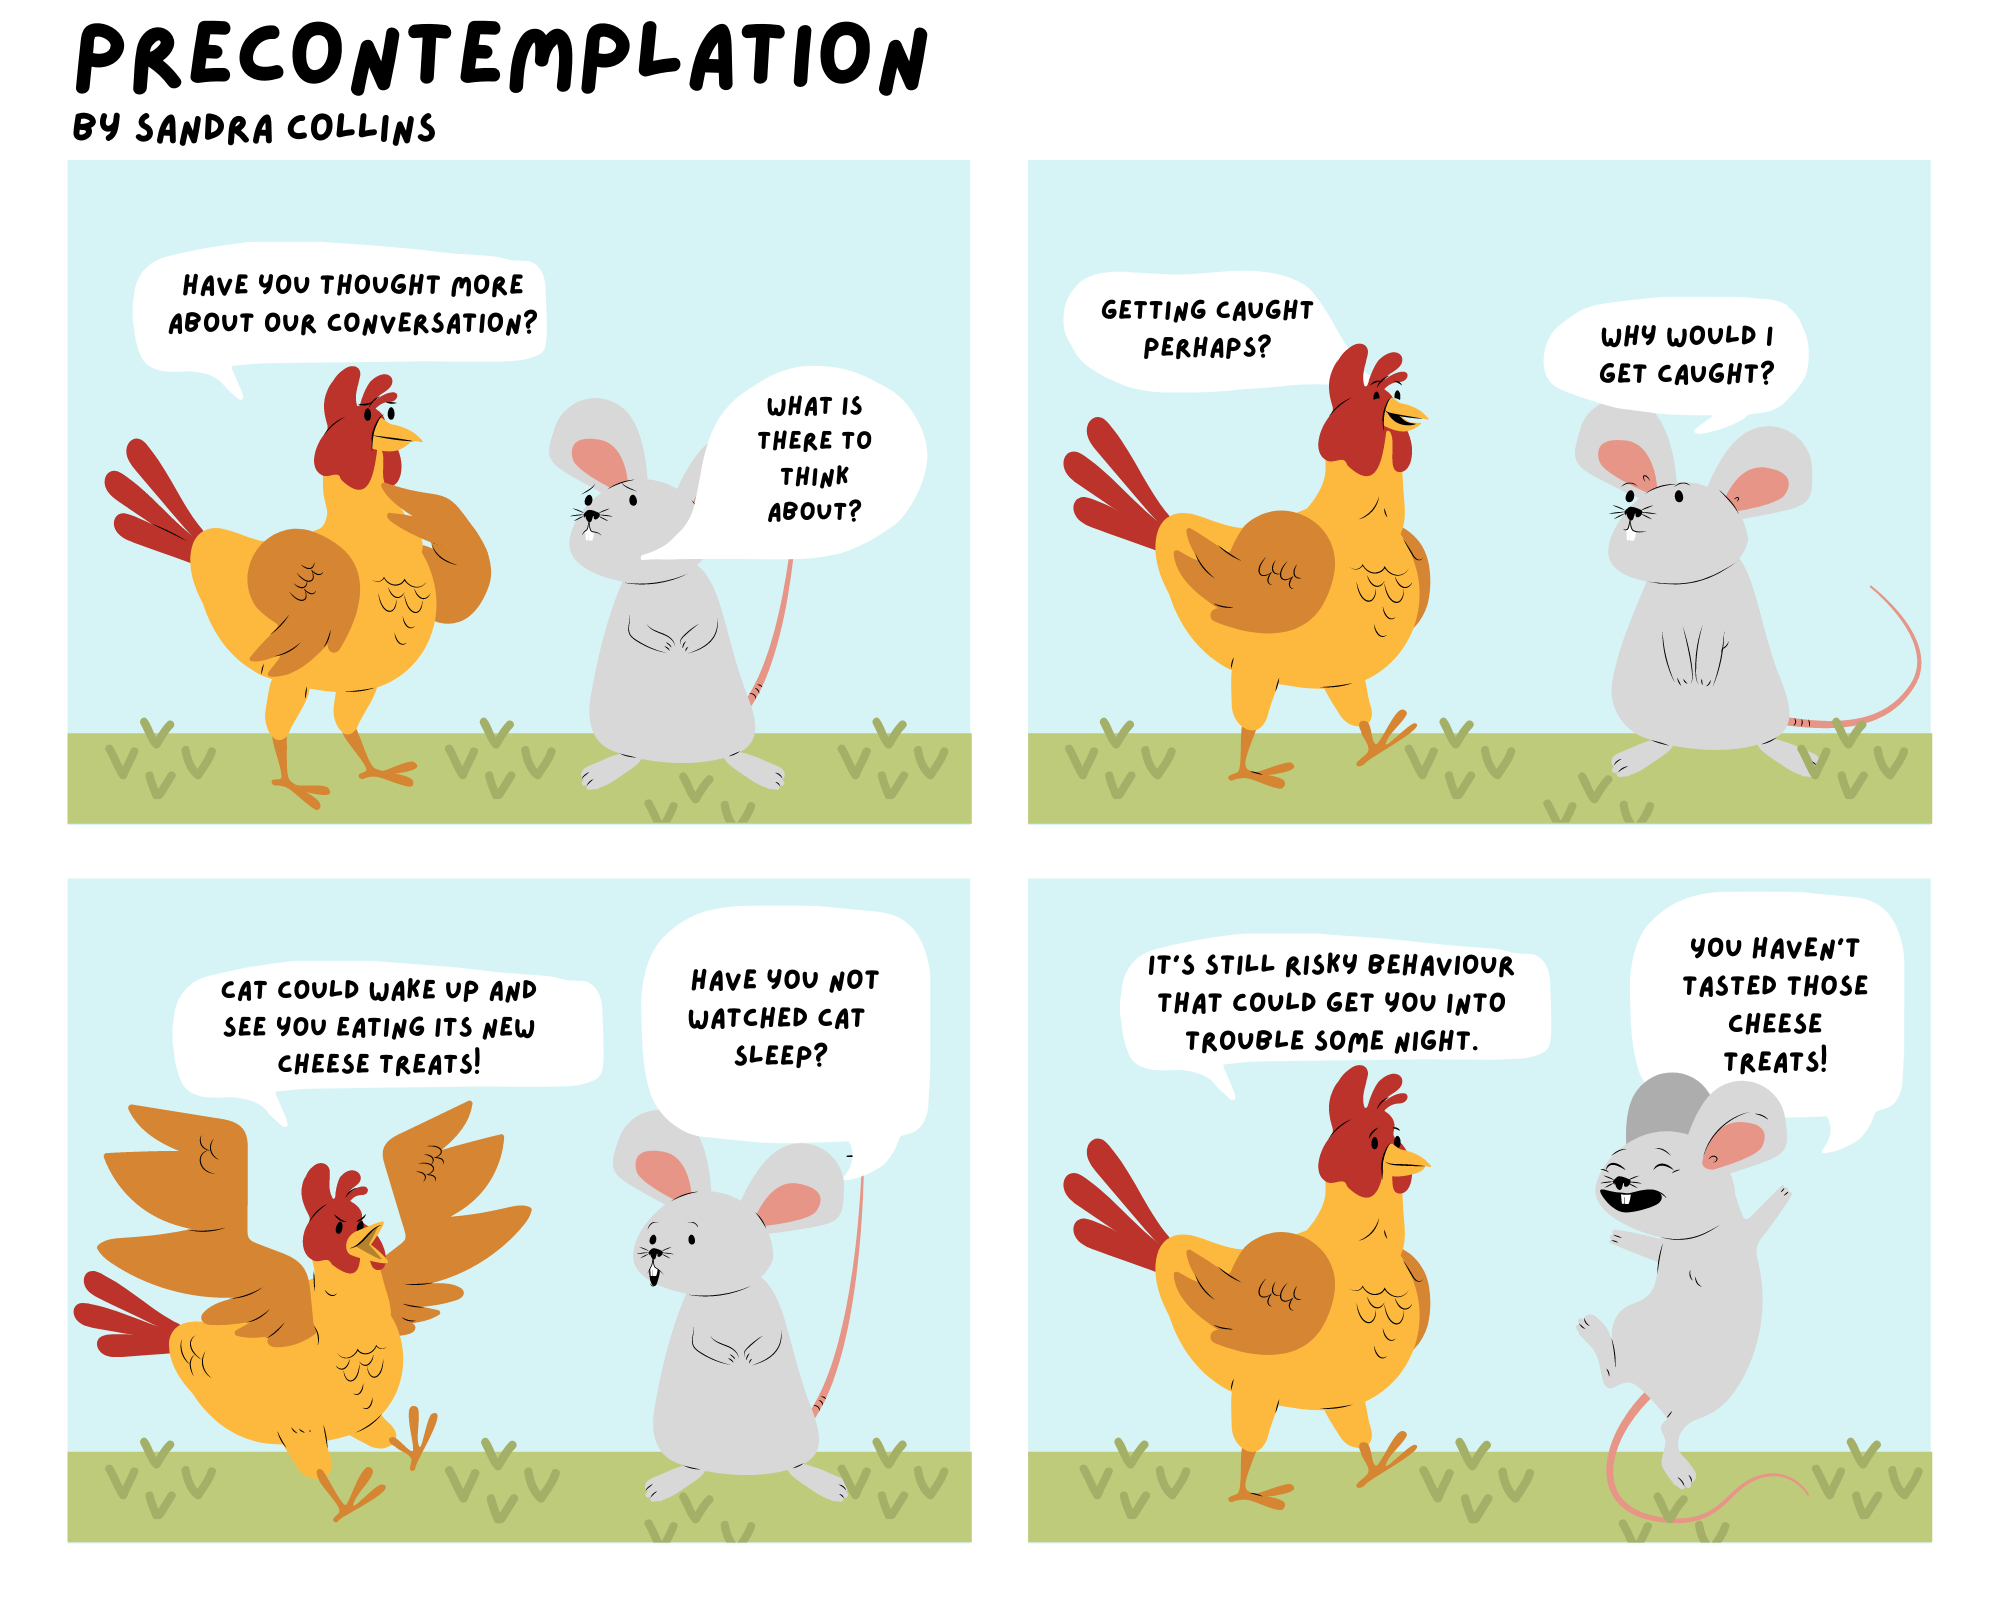 There are four images in this comic strip, each featuring a roster and a mouse. In the first, the roosters asks the mouse "Have you thought more about our conversation?" The mouse replies "What is there to think about?" In the second exchange, the roosters says "Getting caught perhaps?" and the mouse replies "Why would I get caught?" Next the rooster says "Cat could wake up and see you eating its new cheese treats!" and mouse asks "Have you not watched cat sleep?". Finally rooster says "It's still risky behaviour that could get you into trouble some night." Mouse replies "You haven't tasted those cheese treats!"